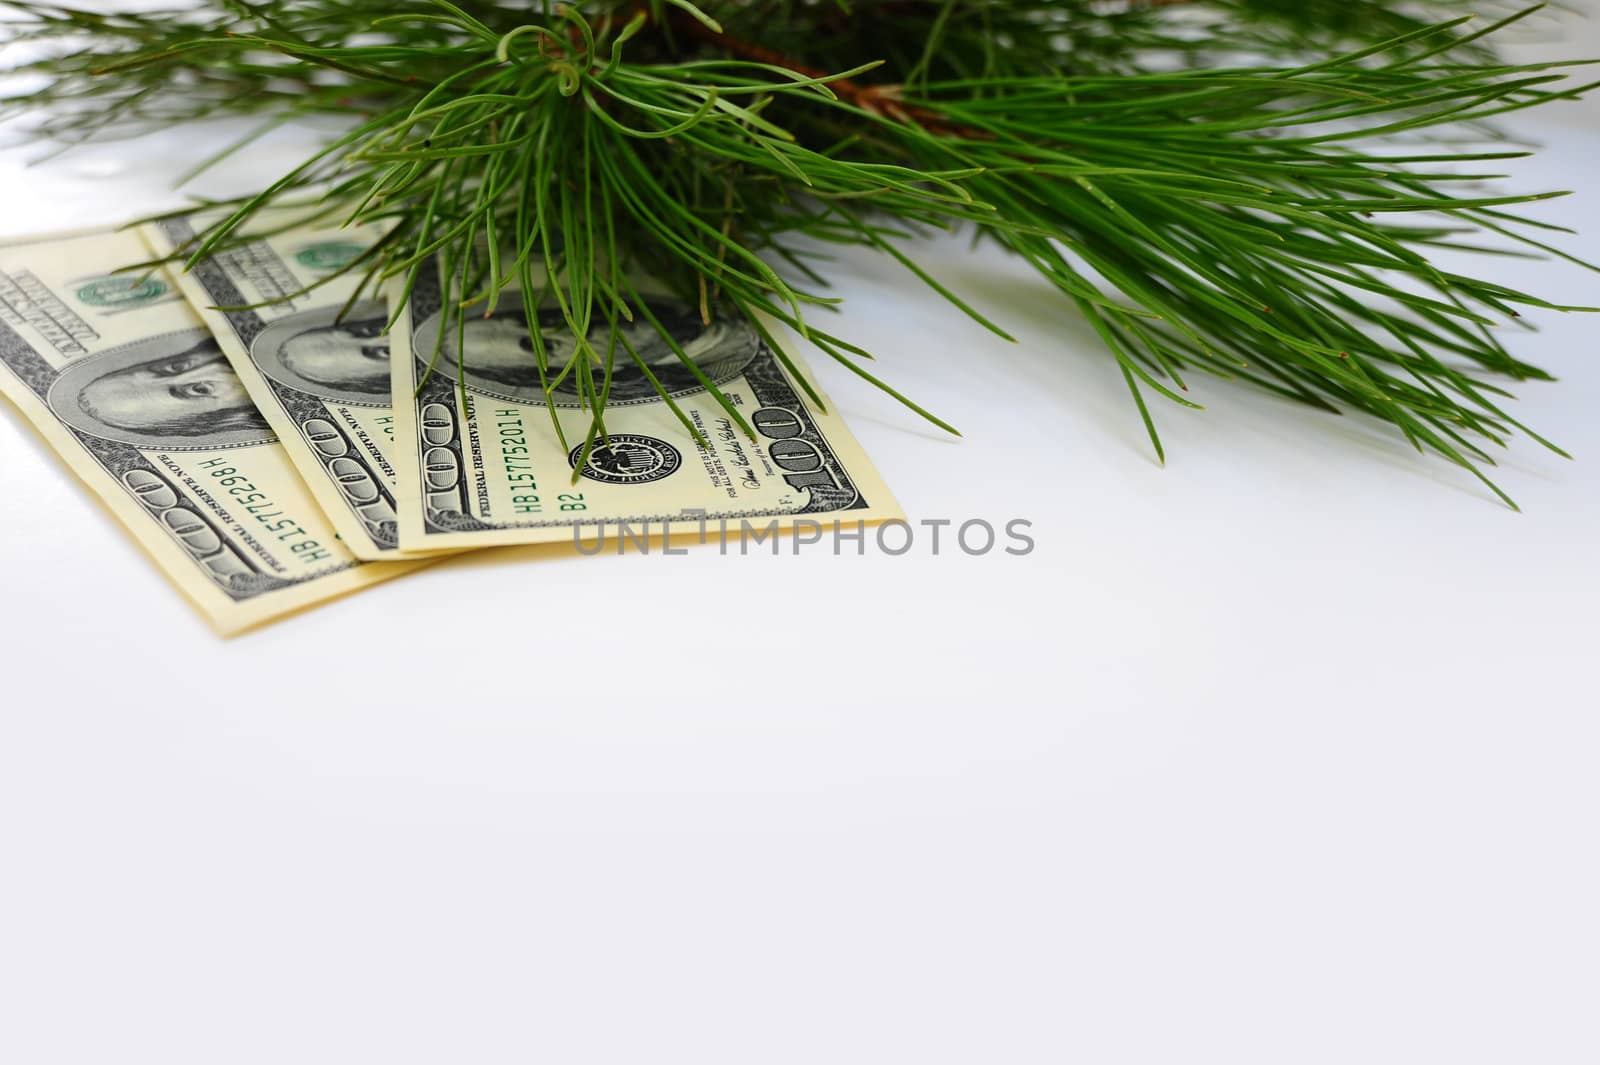 Gift Christmas With Money On White Background